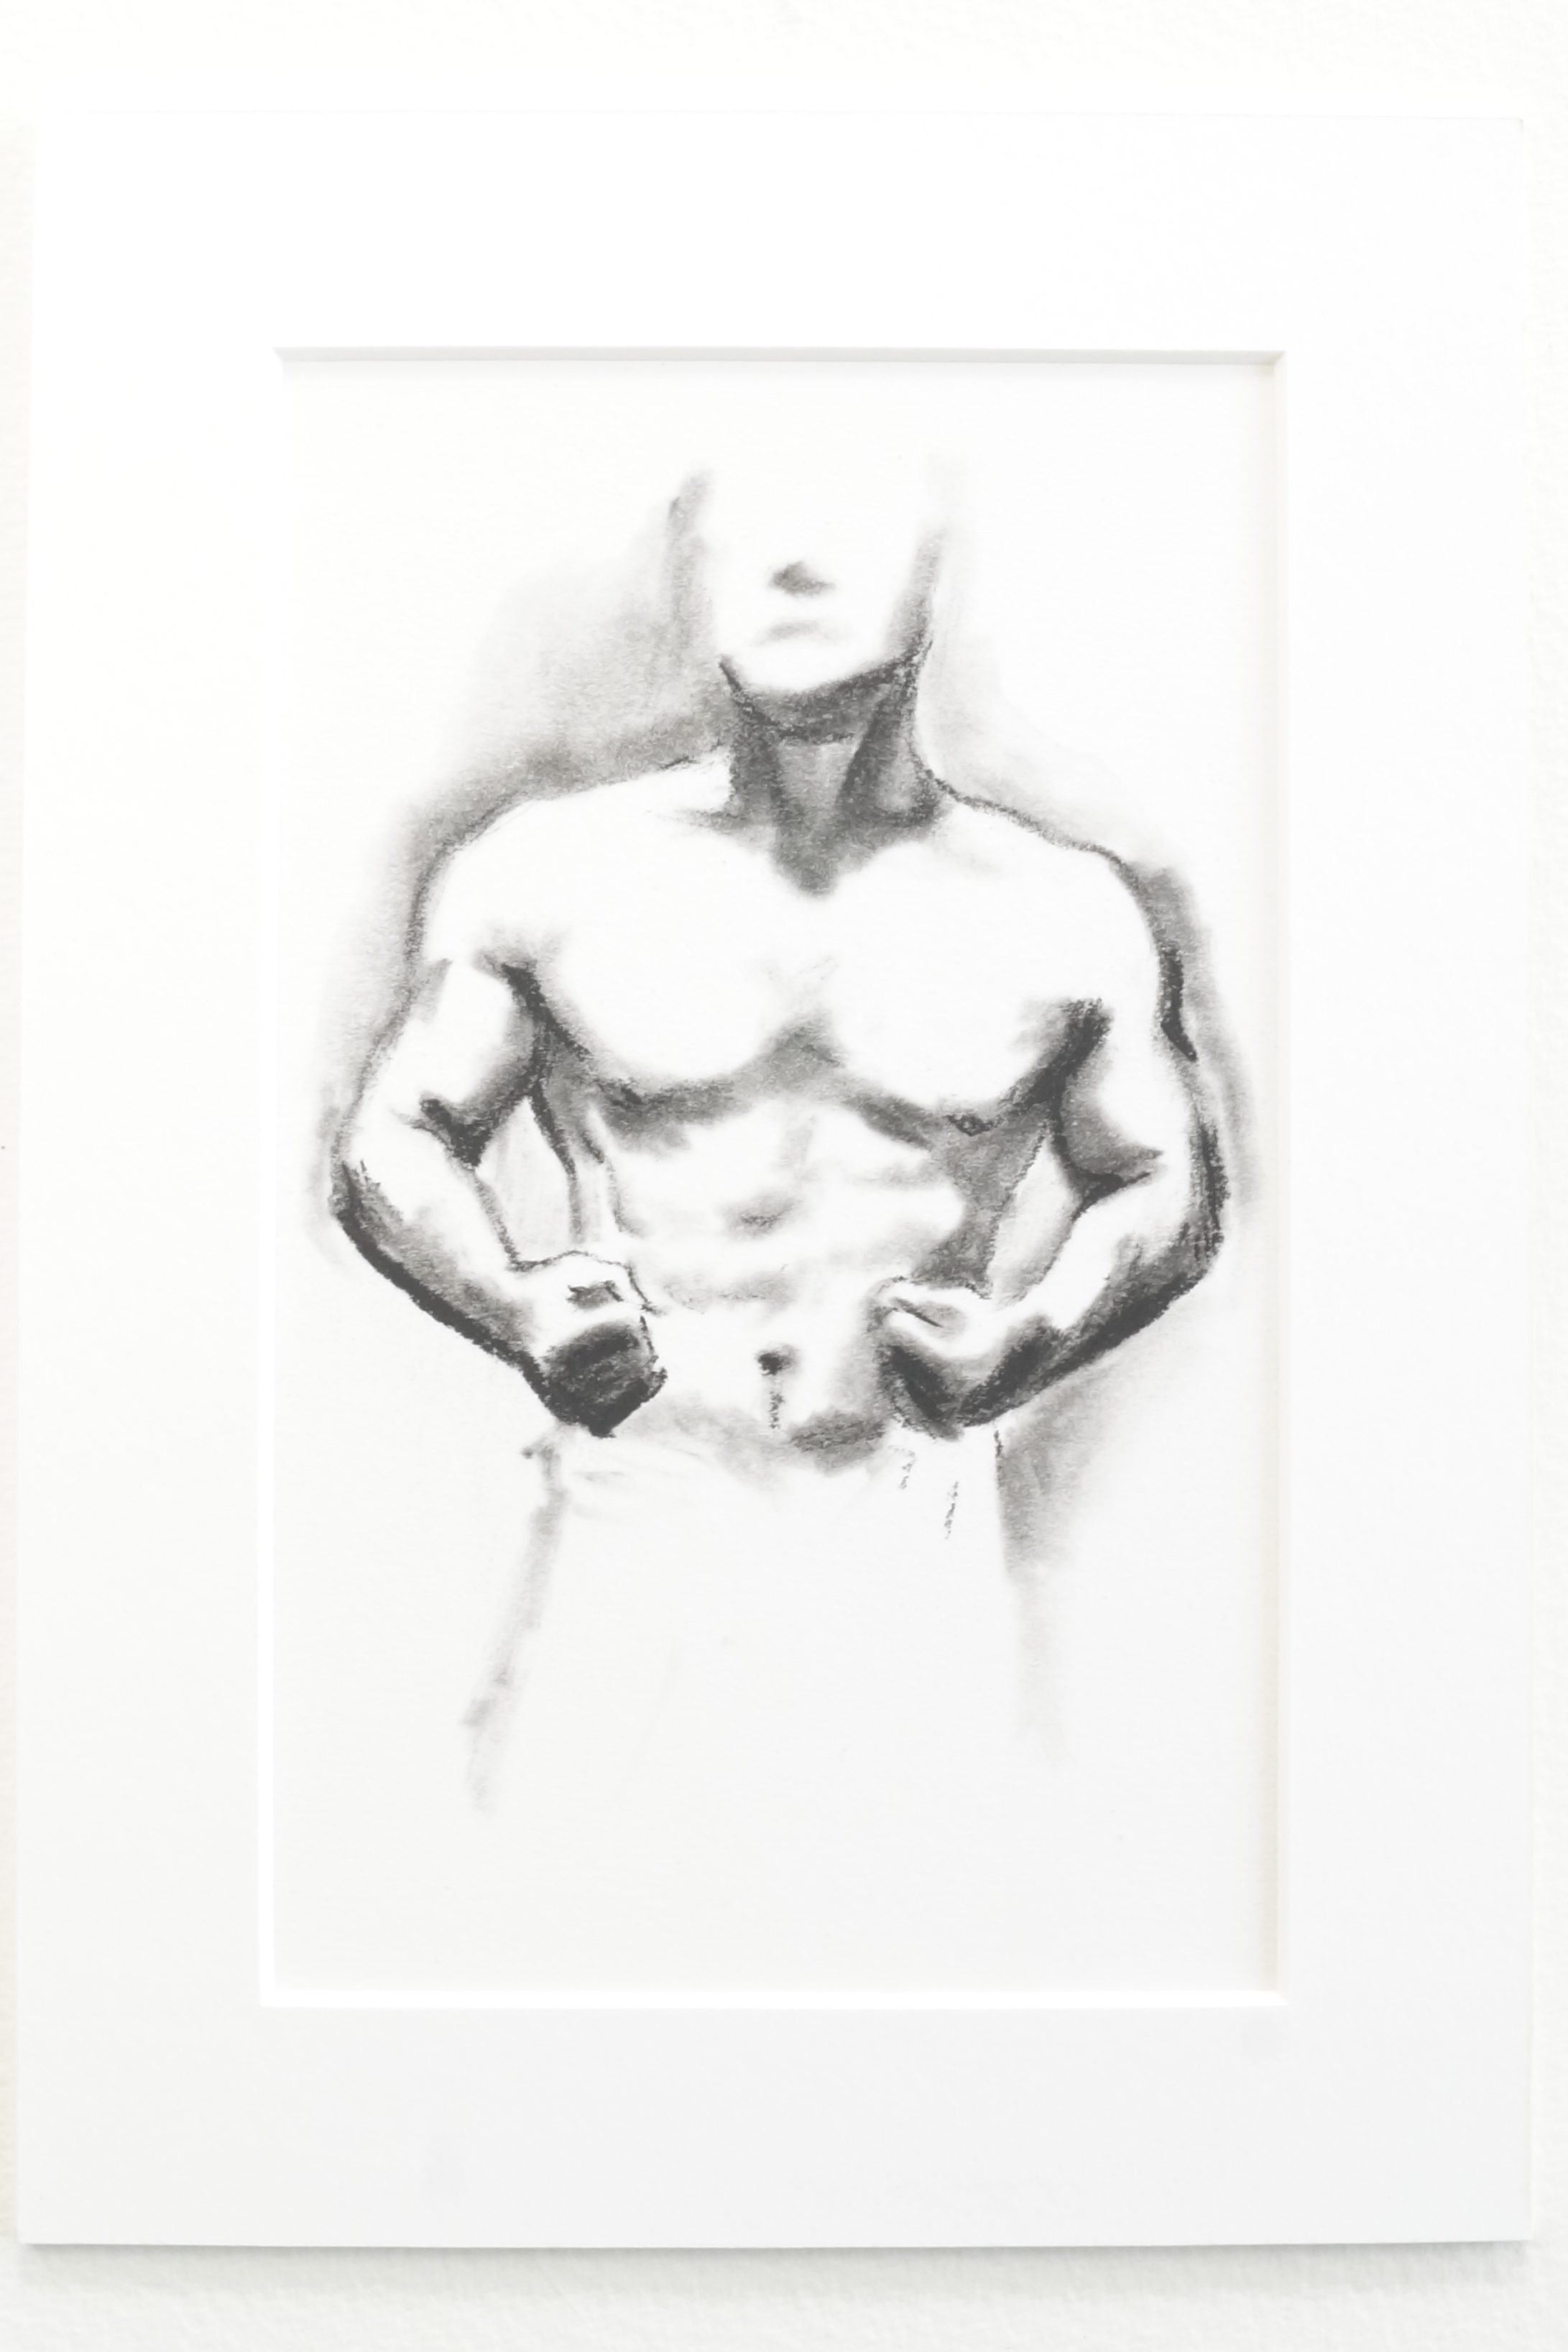 Muscle Study 5 by Lee Devonish